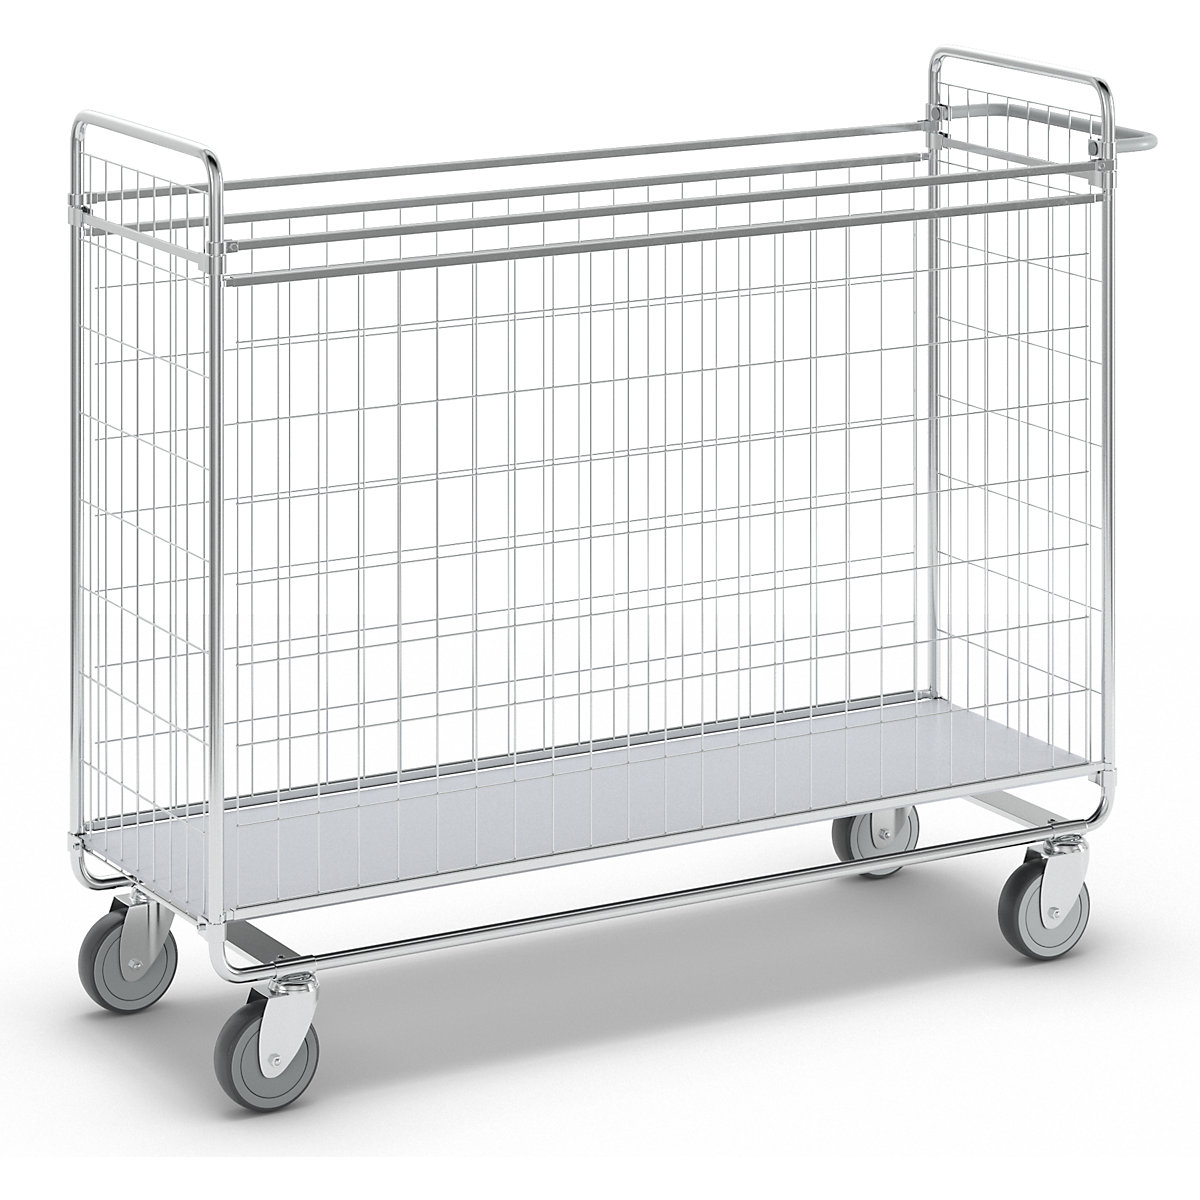 SERIES 100 four-sided trolley – HelgeNyberg, max. load 100 kg, LxWxH 1380 x 460 x 1120 mm-3